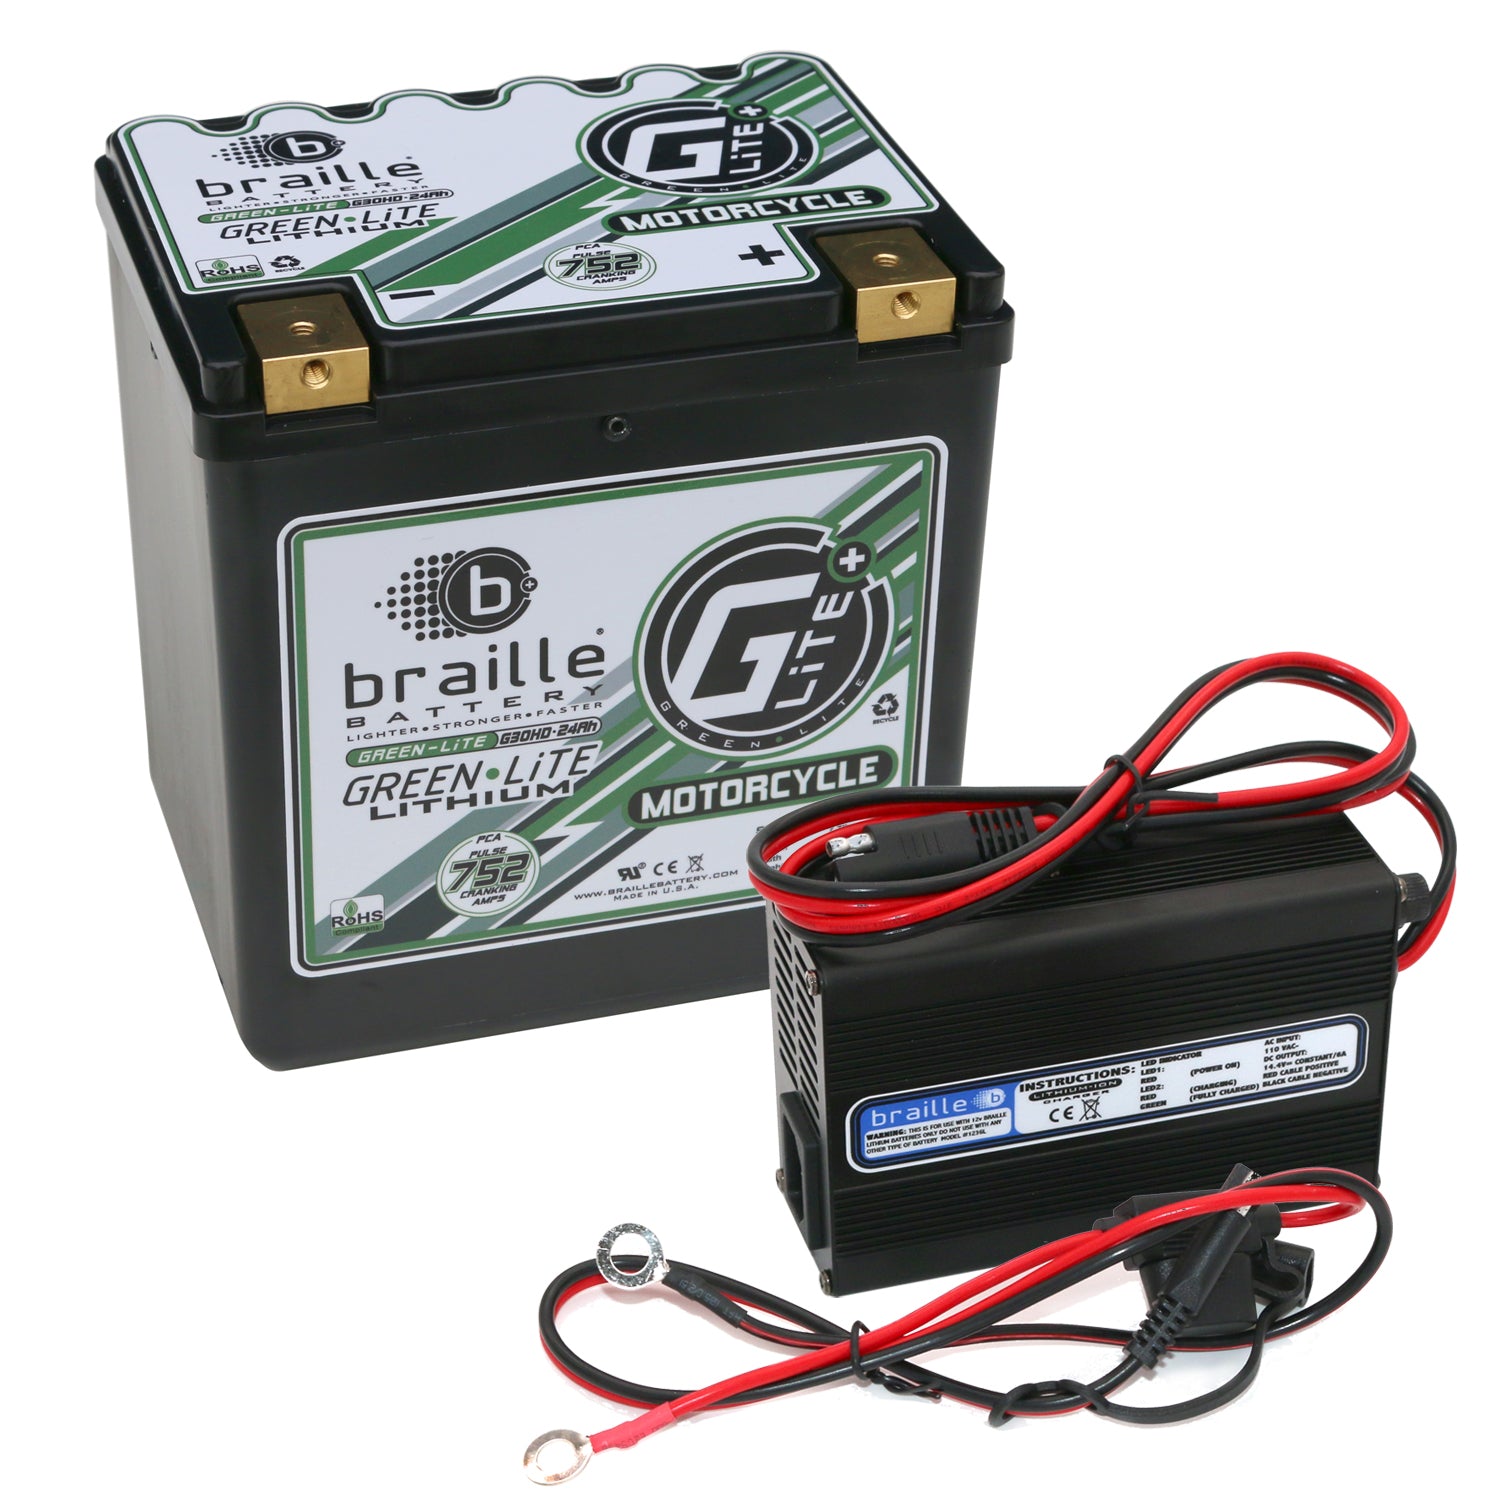 Green-Lite Lithium-Ion 12 V Motorcycle Battery and 6